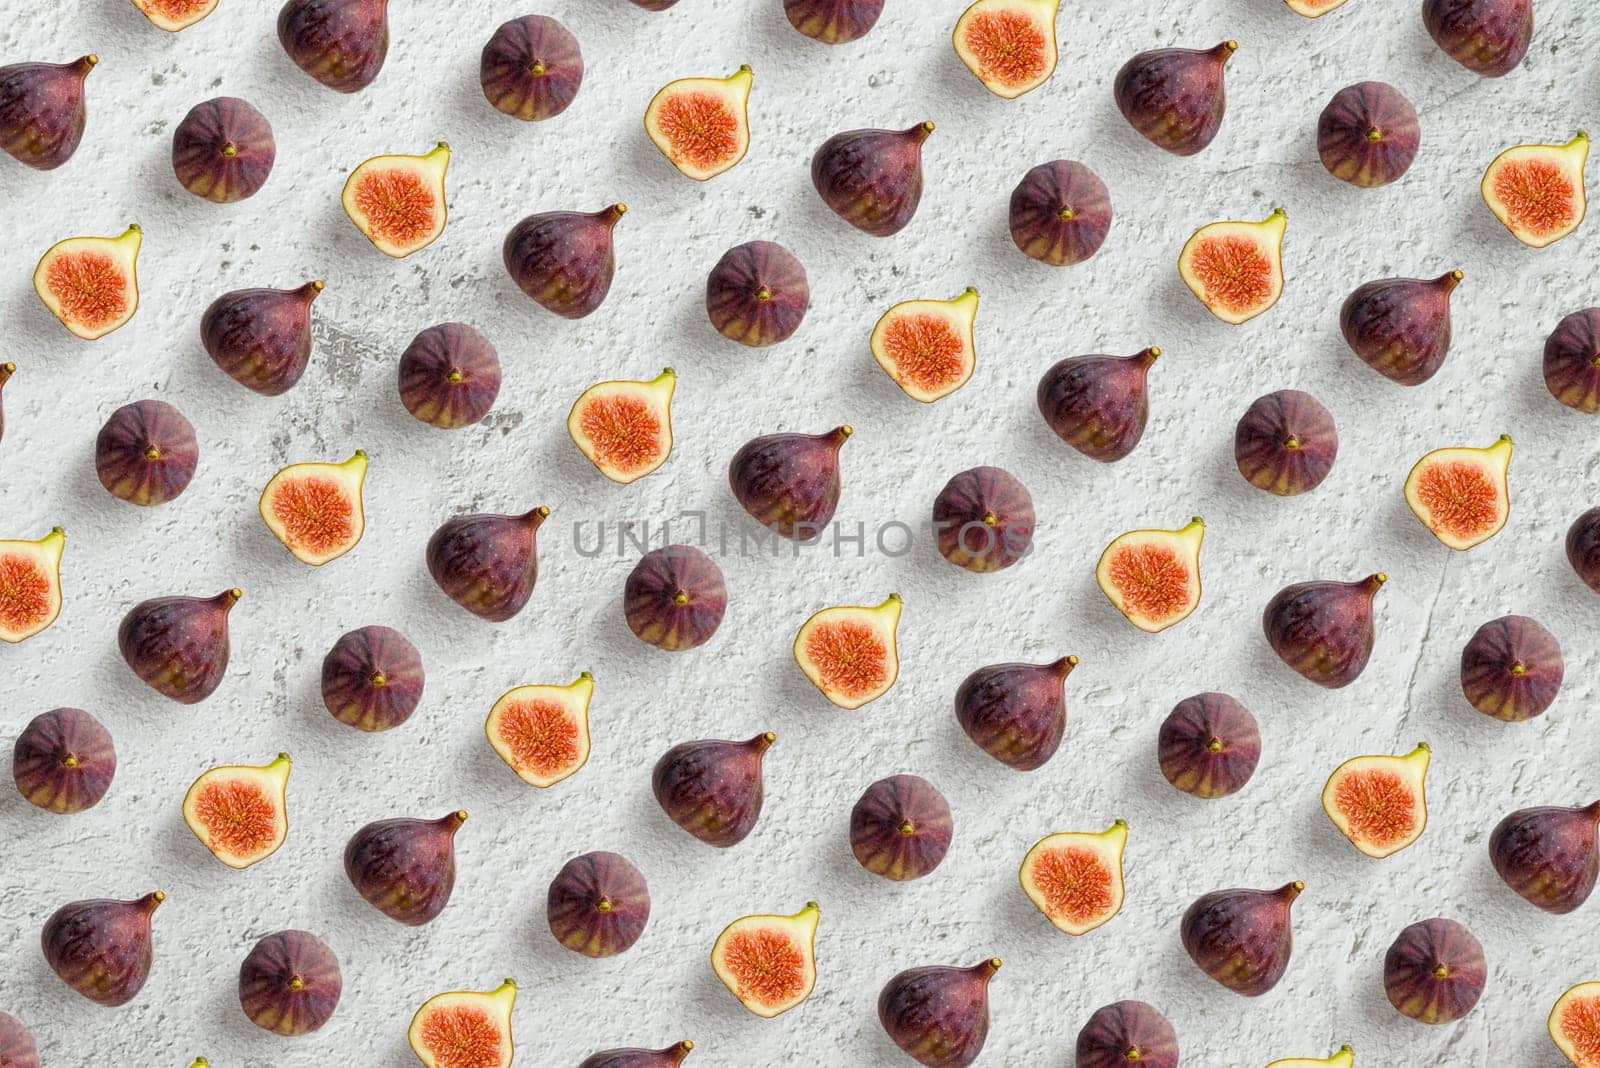 Top view of rows of whole and halves figs on stone table